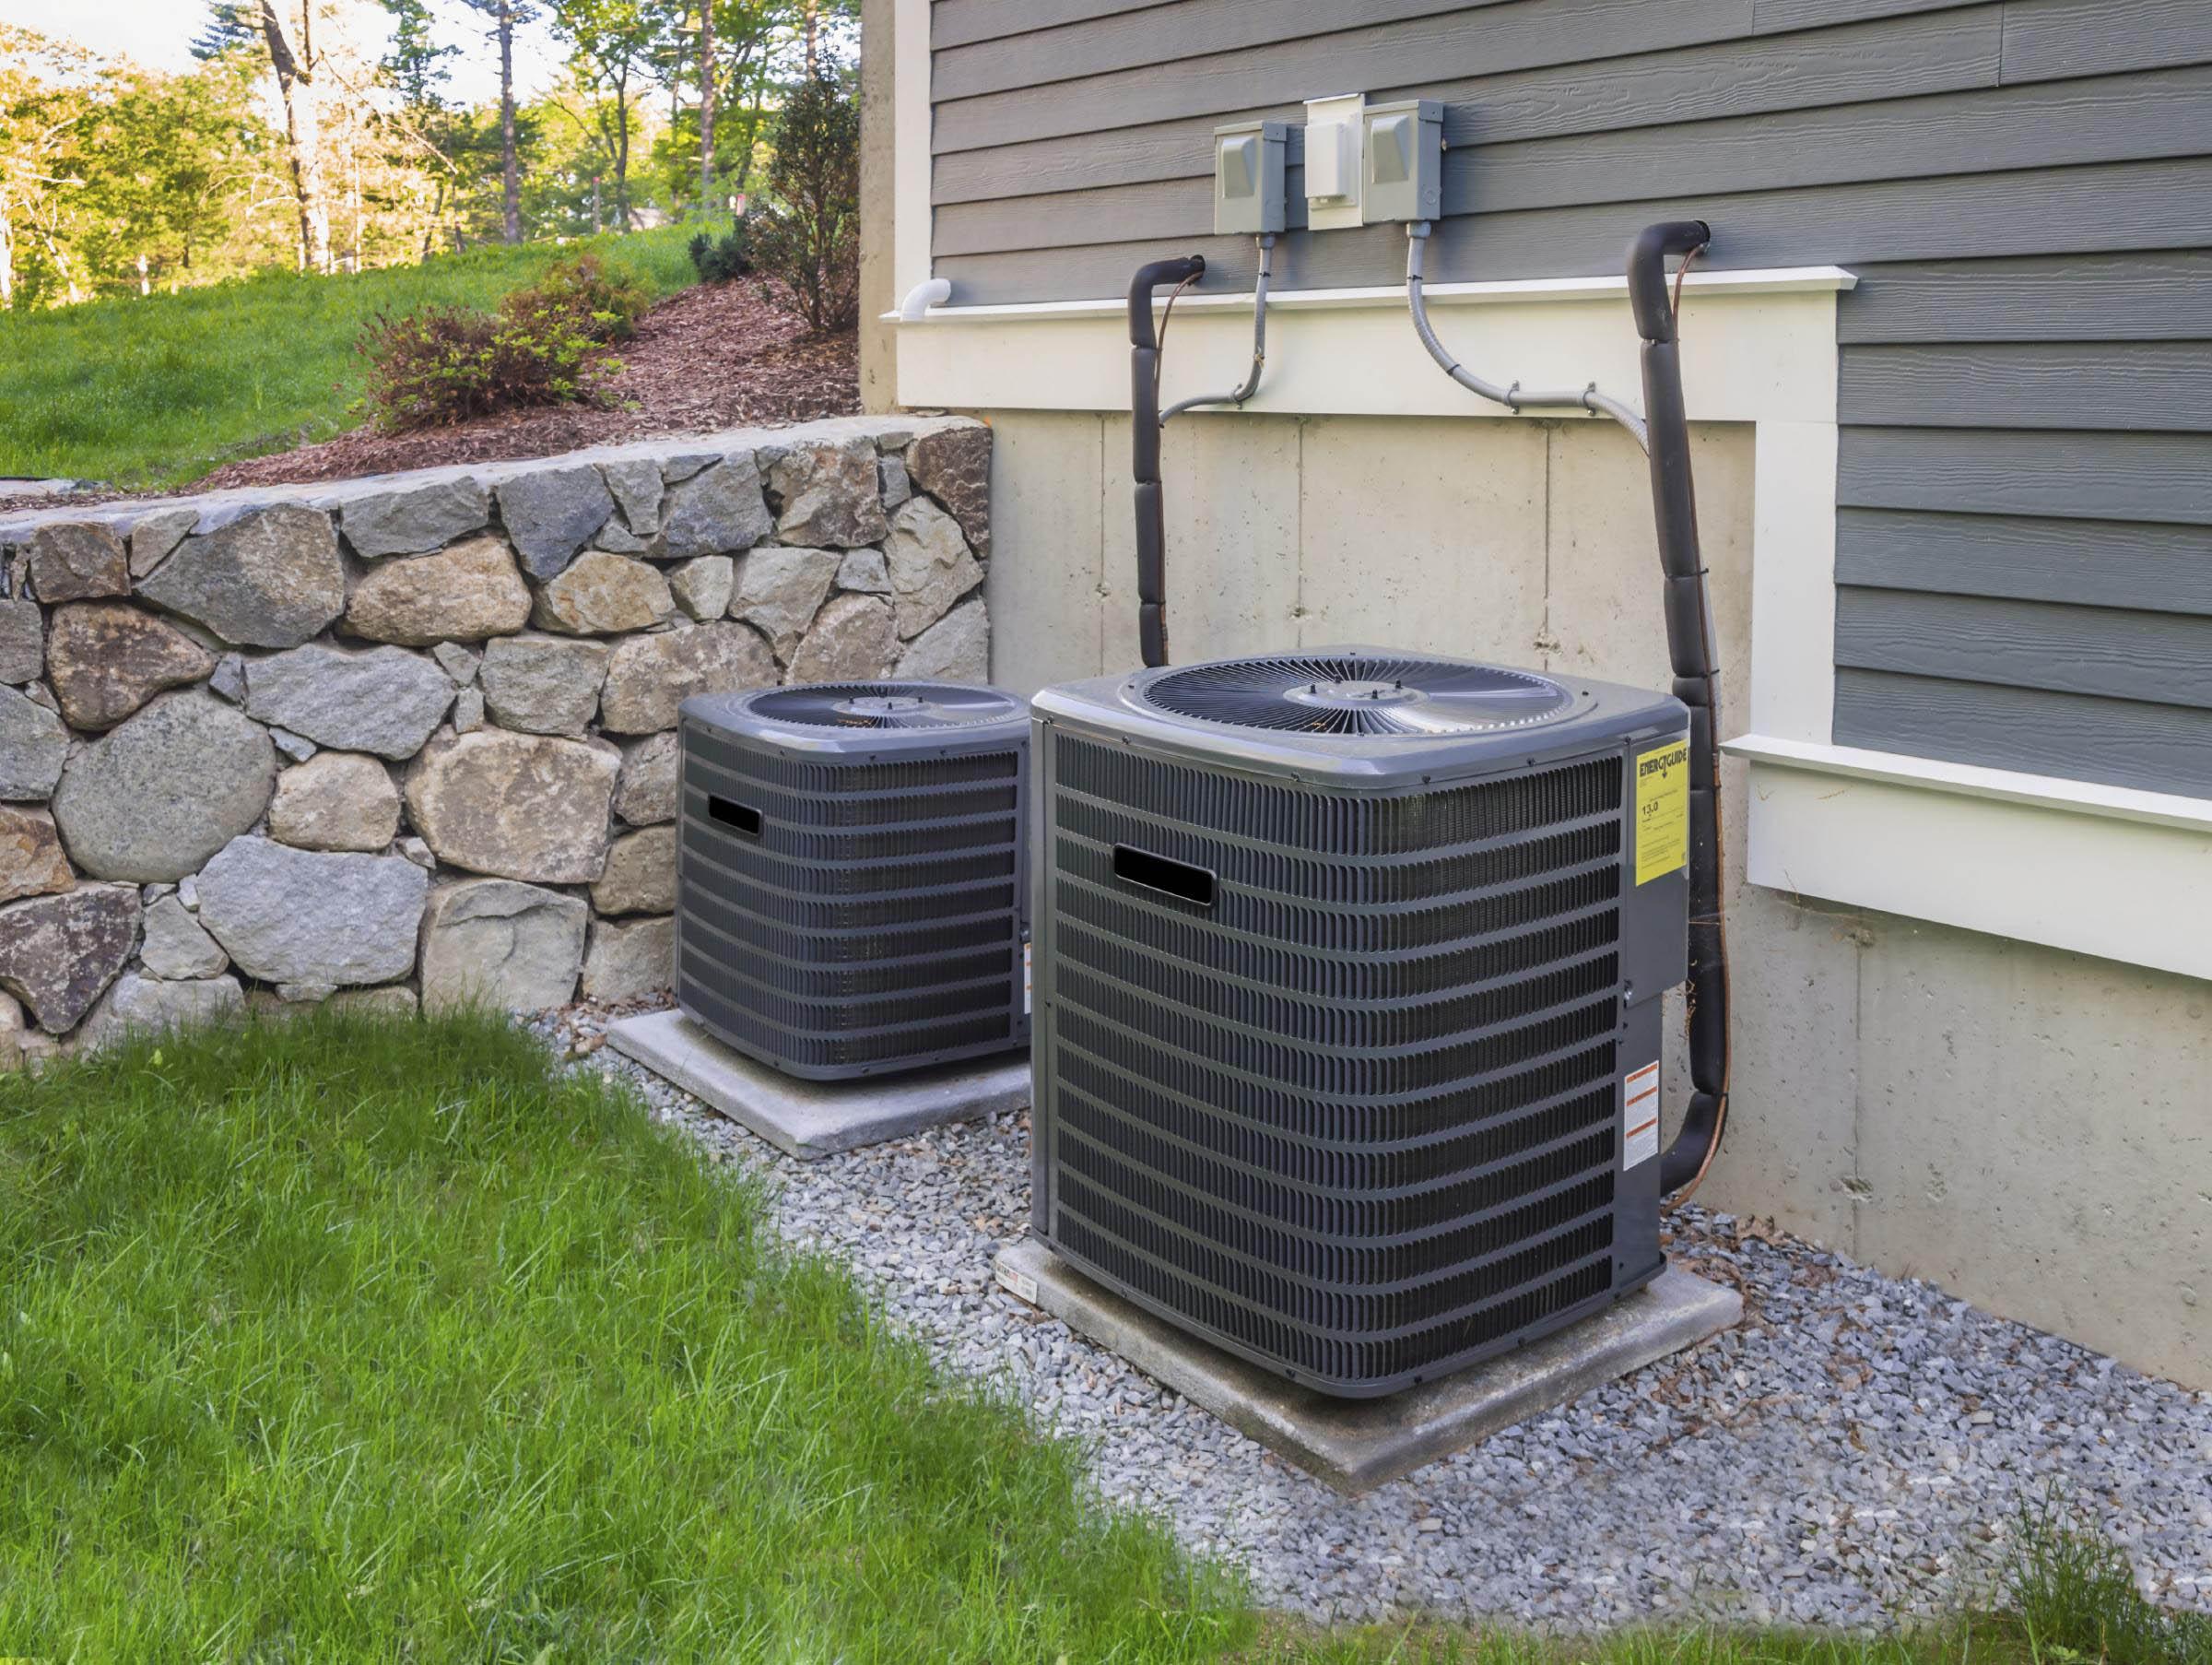 Reduce Your Air Conditioner’s Load and Save on Cooling this Summer